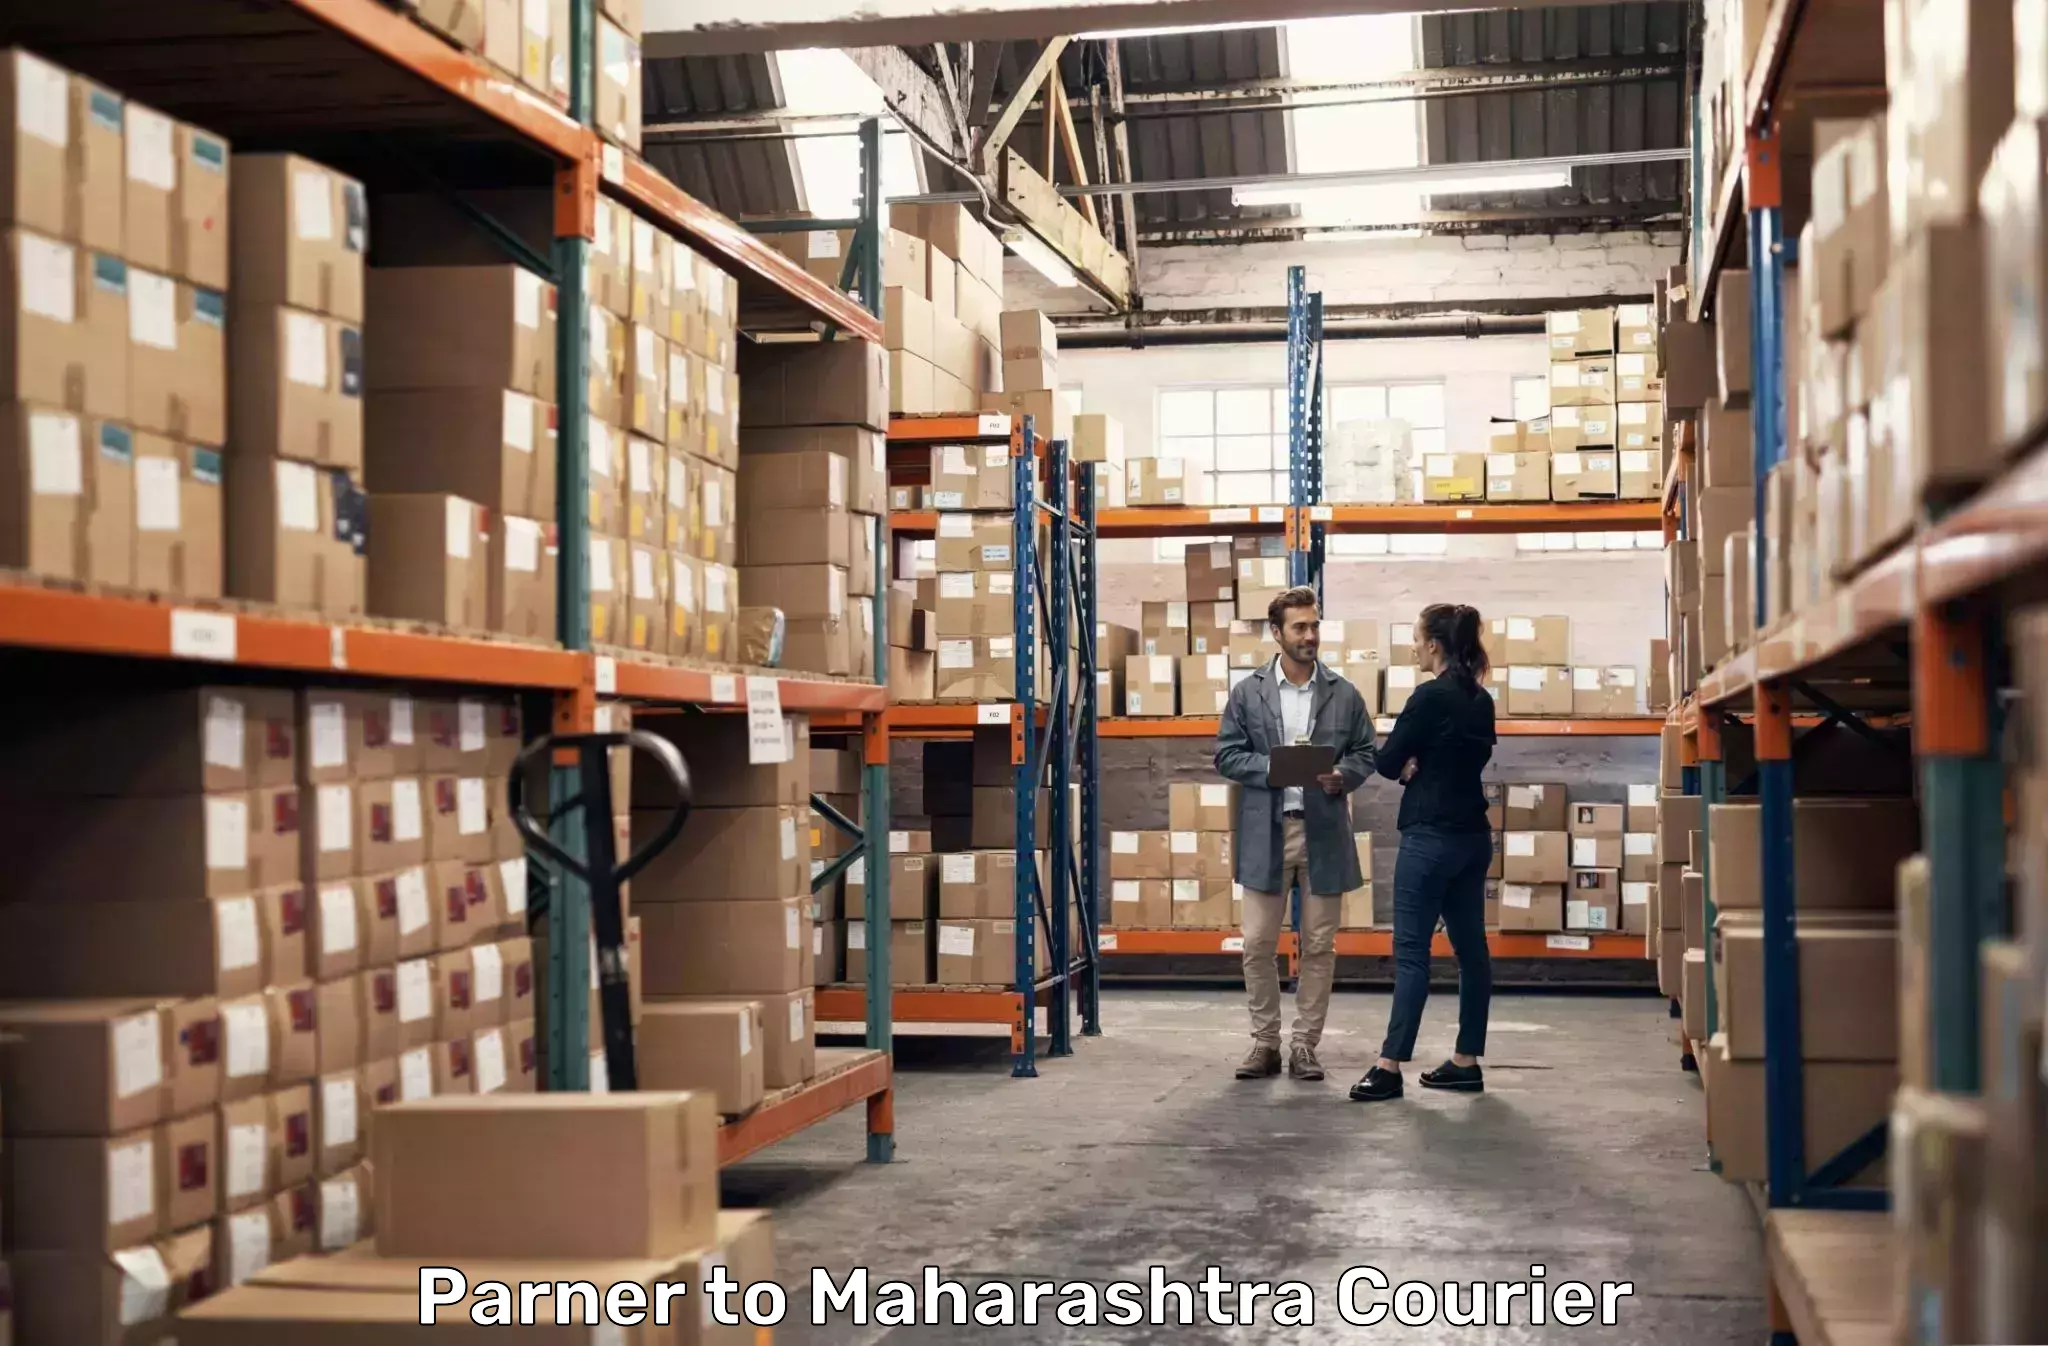 State-of-the-art courier technology Parner to Ramtek